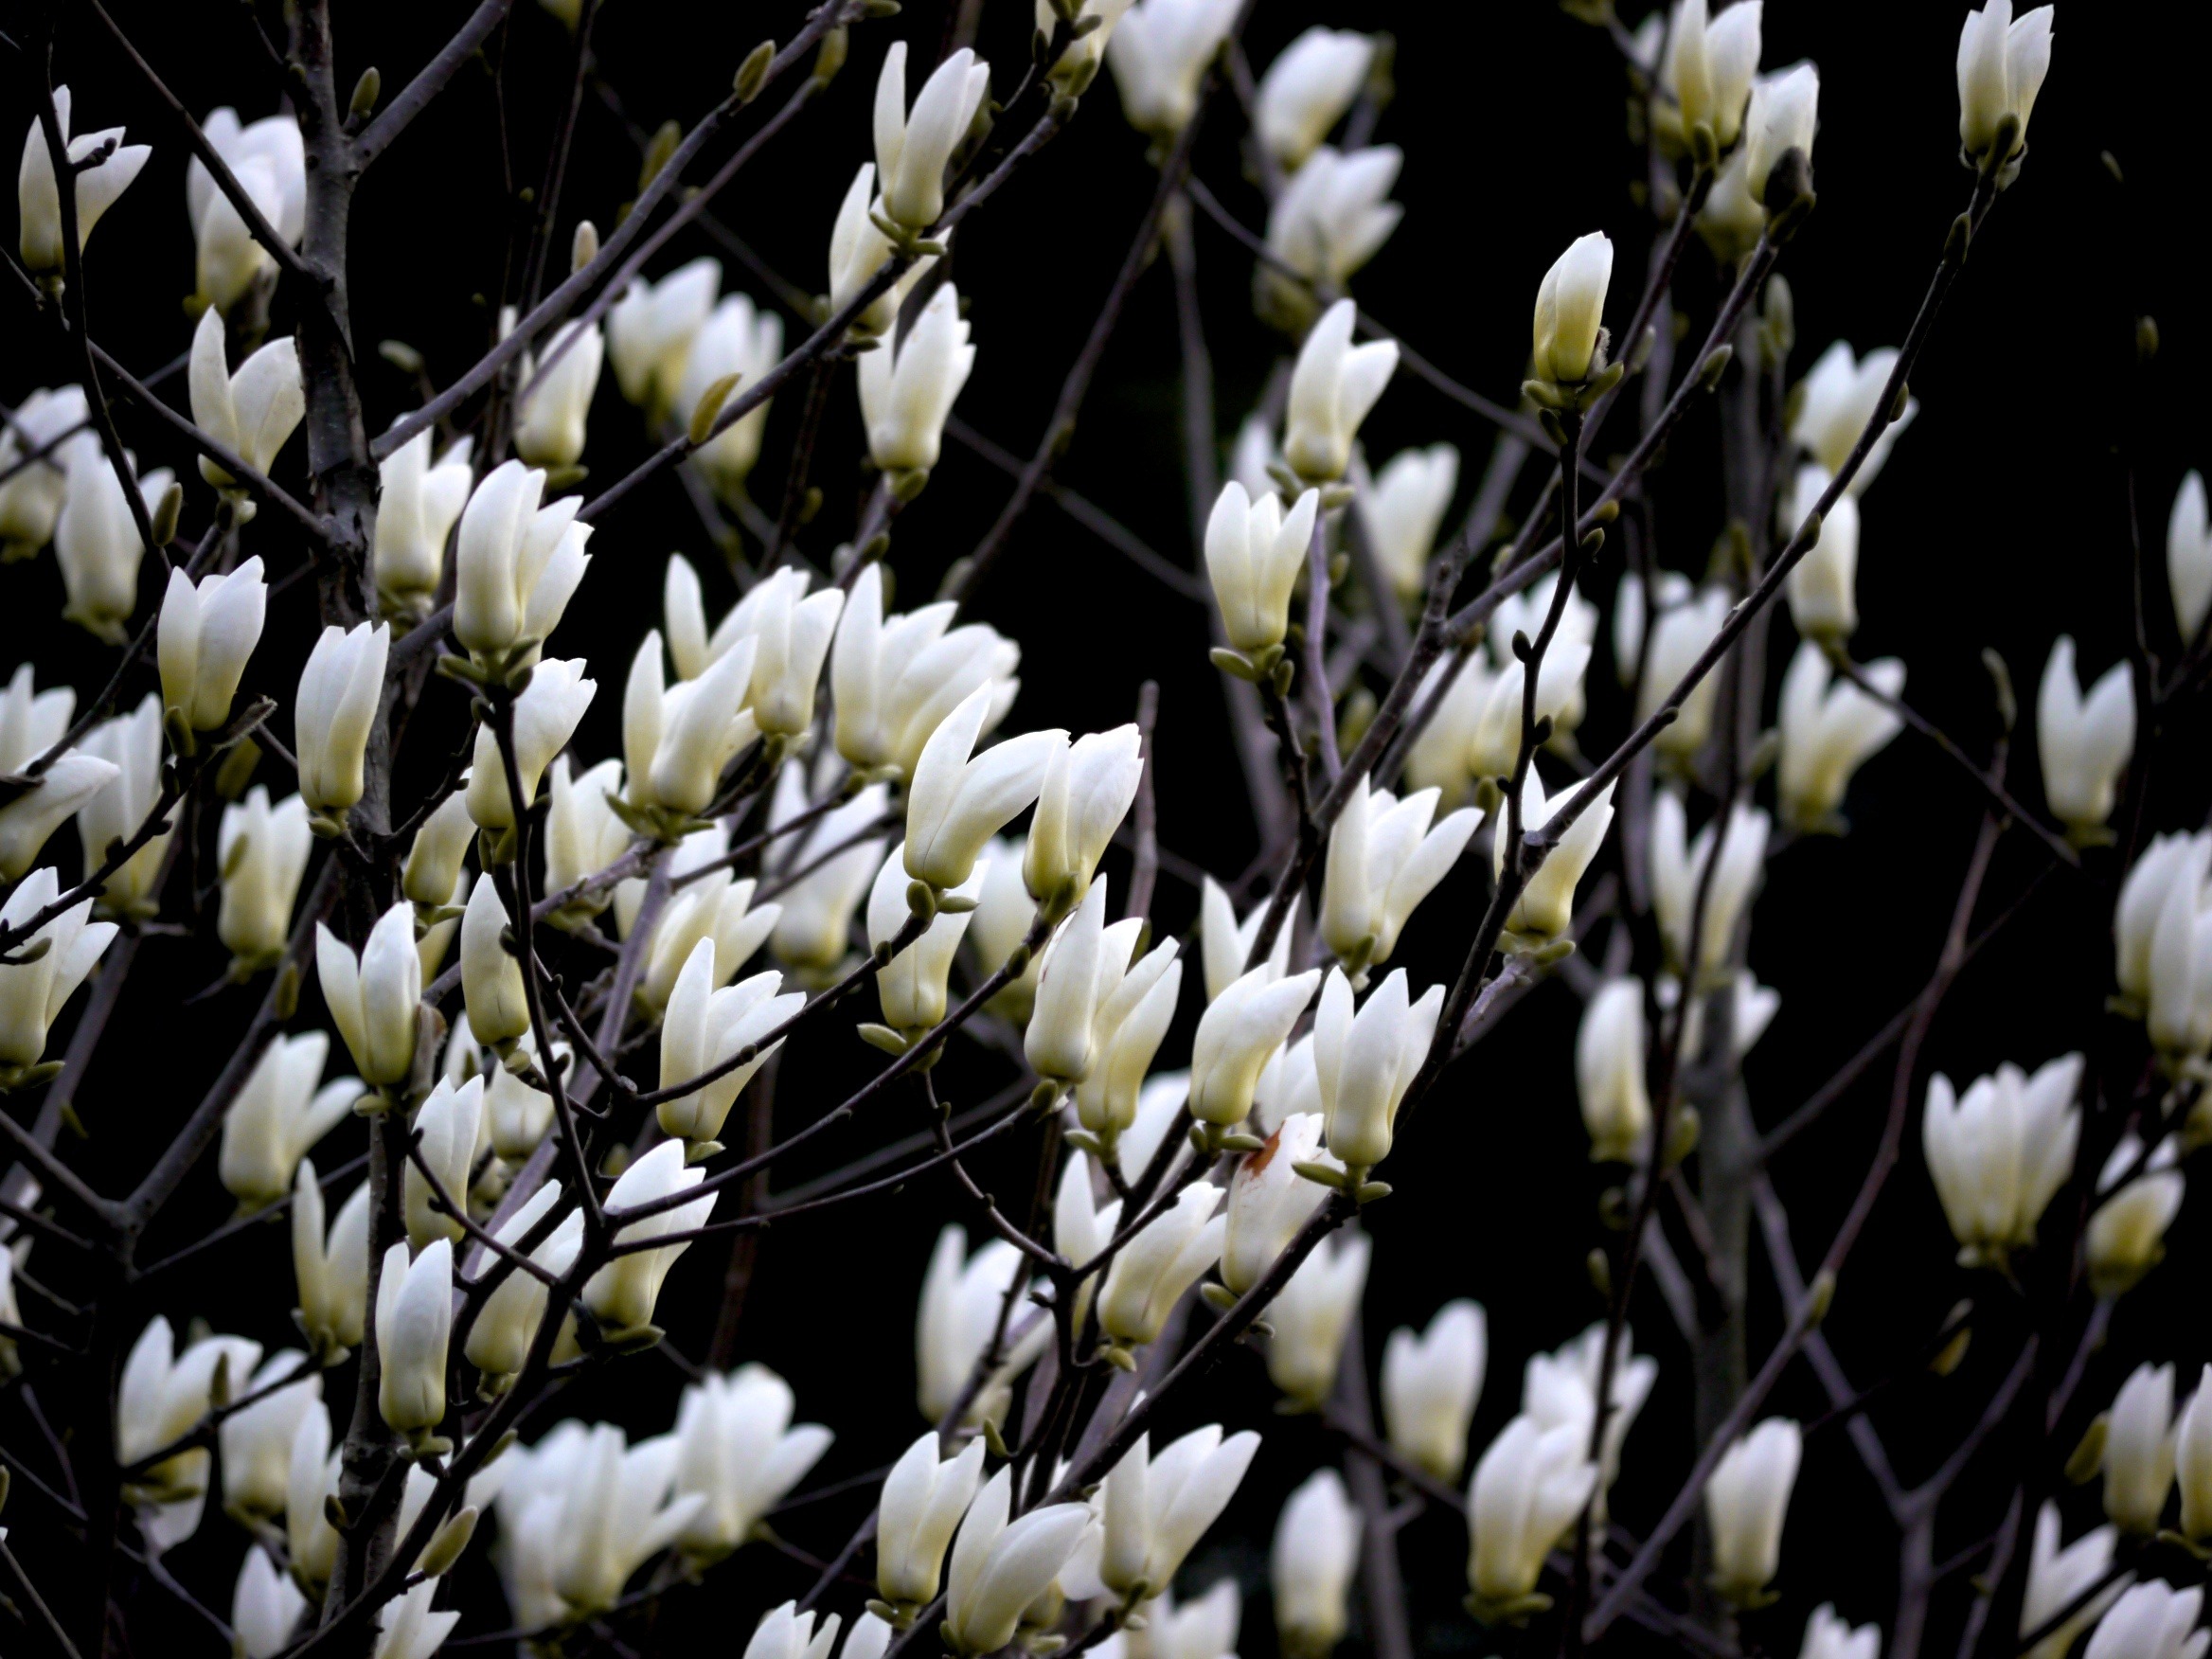 White magnolia flowers in spring free image download